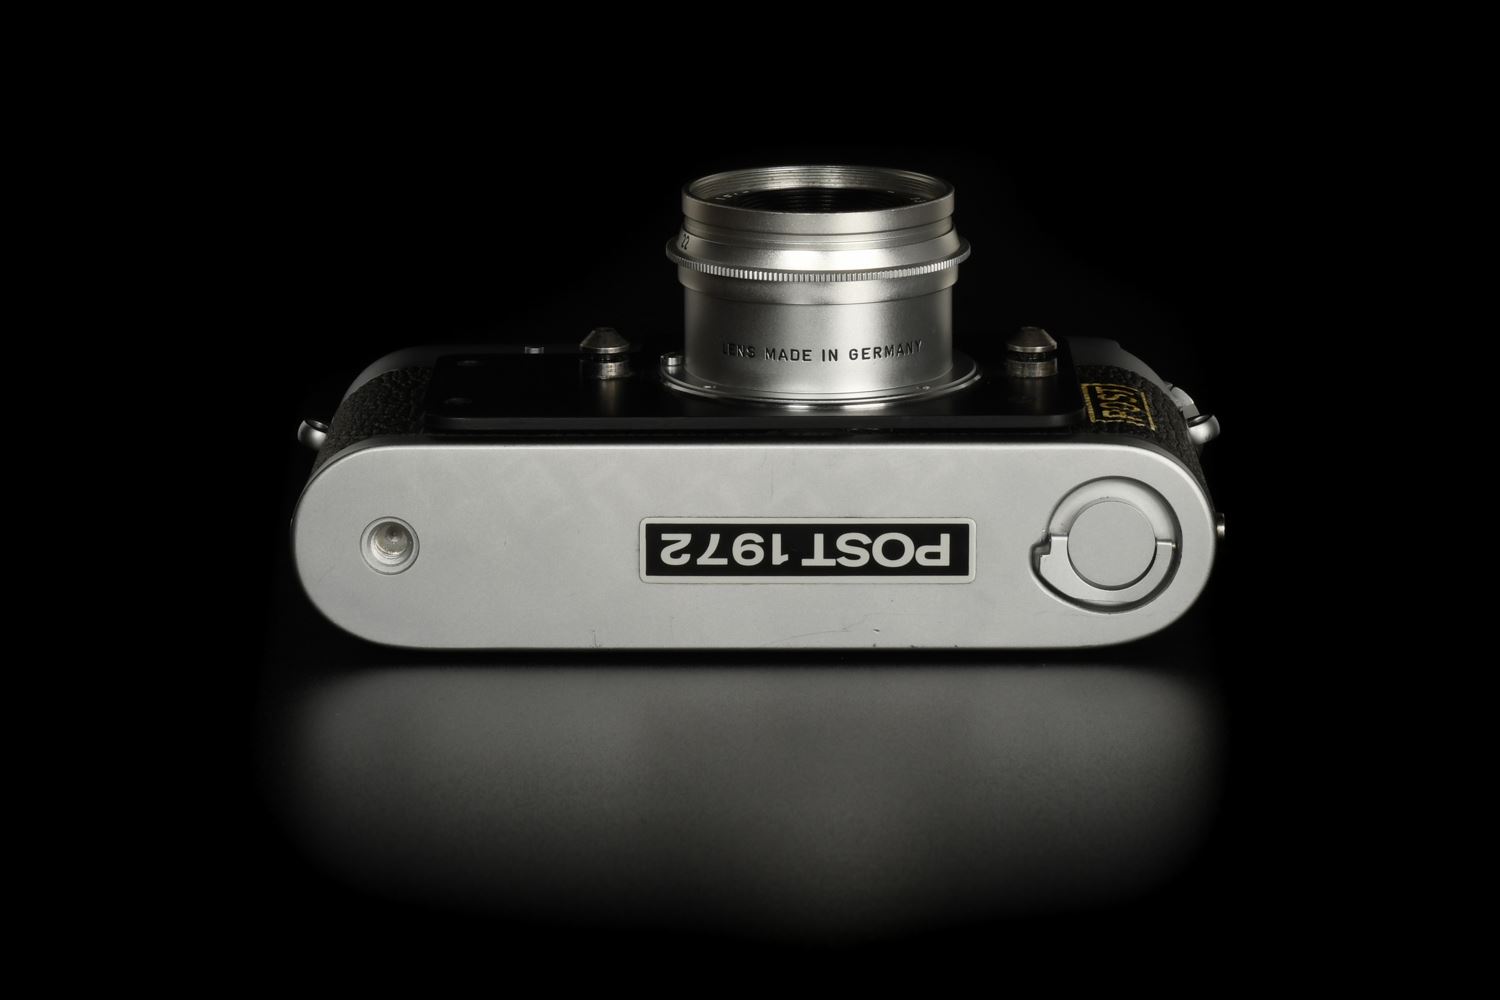 Picture of Leica Mda Post 24x27mm Format with Summaron 35mm f/2.8